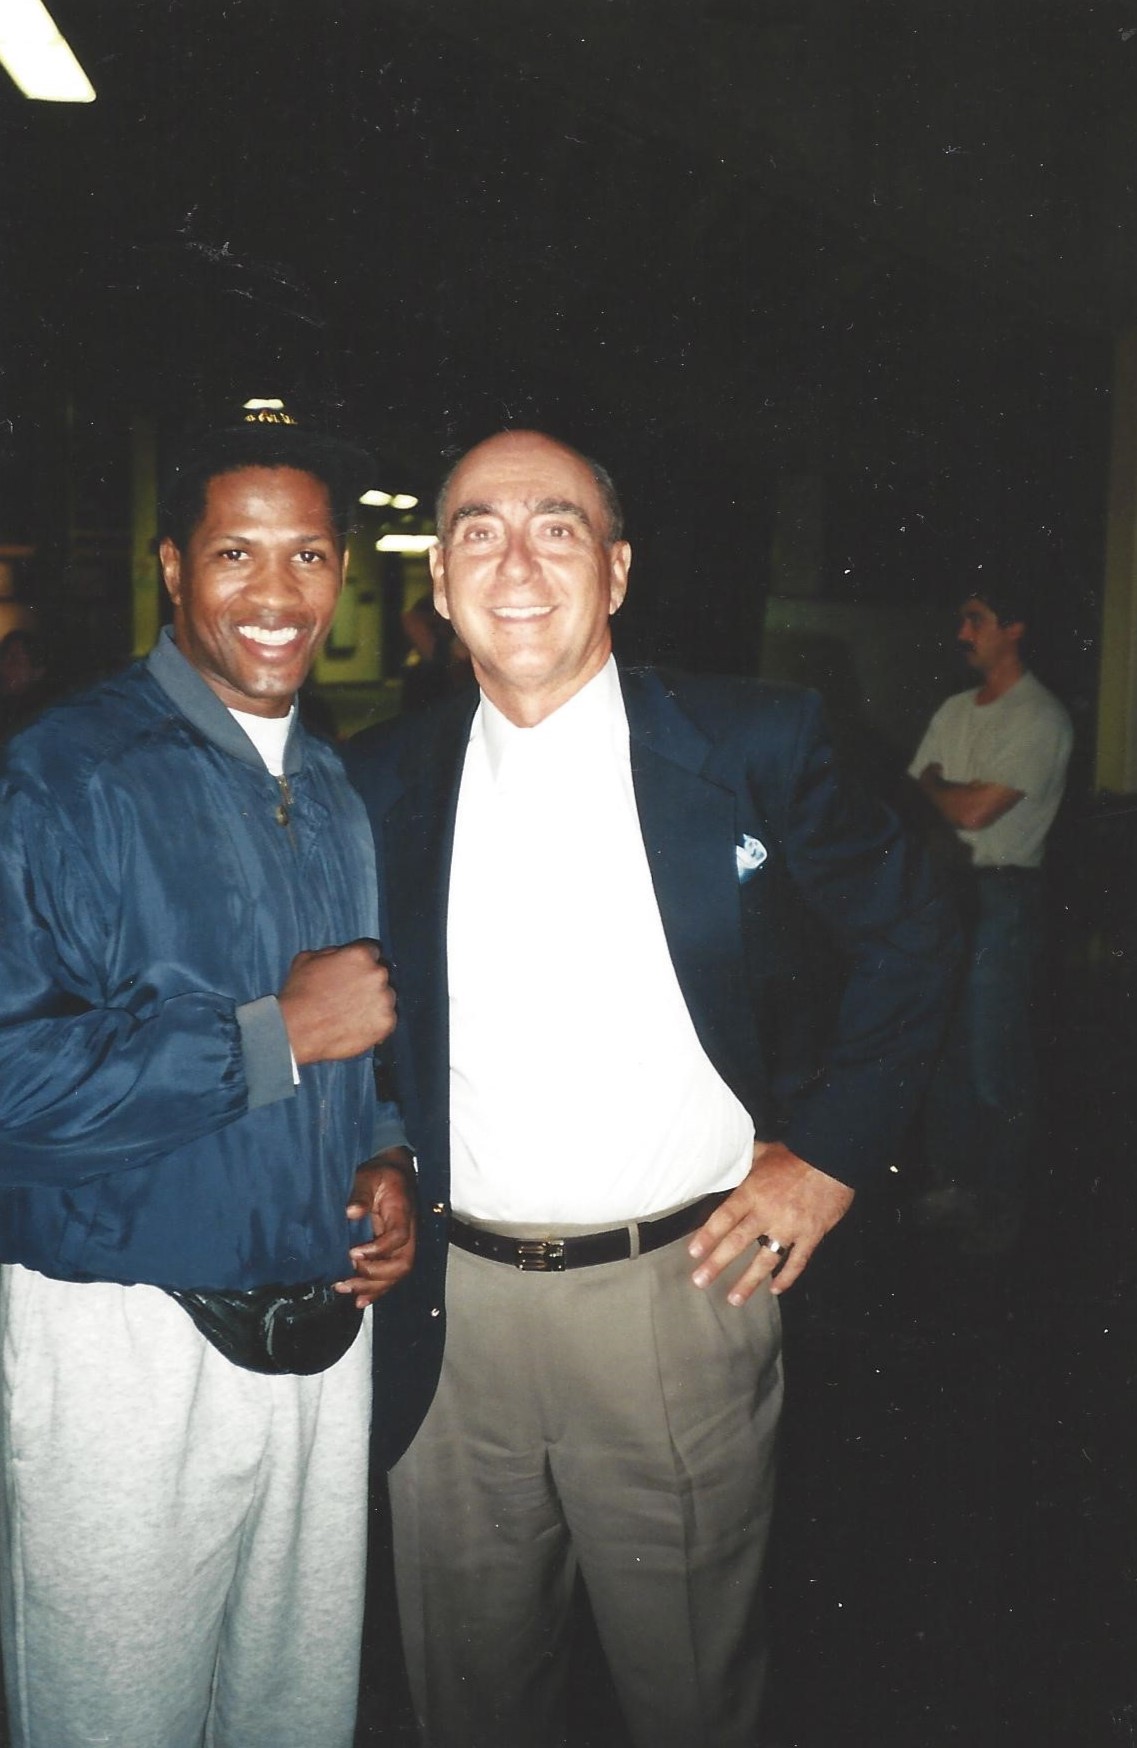 The greatest voice in NCAA basketball history, Mr. Dick Vitale!!! I loved sharing stories with him about former University of Memphis players!